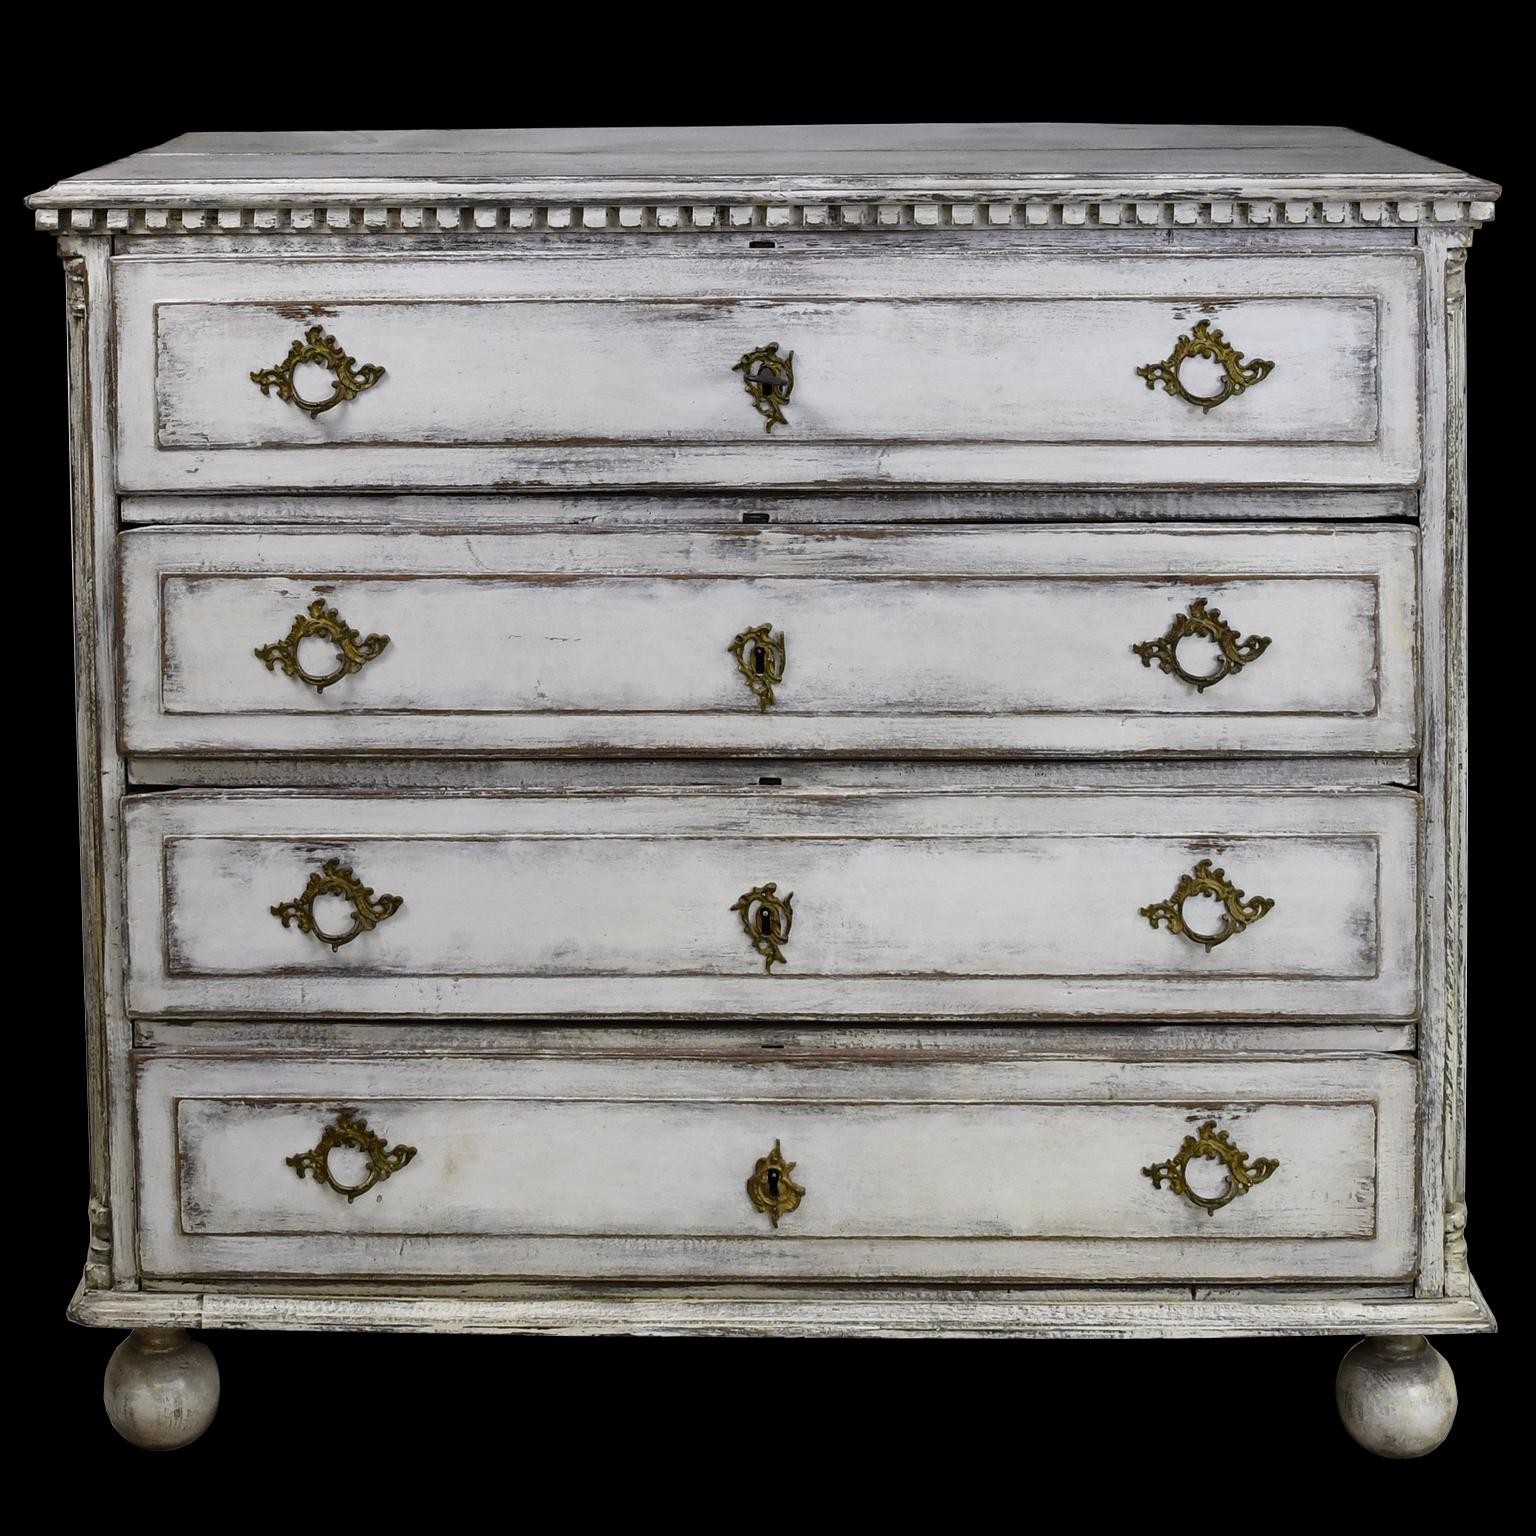 A lovely Swedish painted chest of drawers in oak with dental molding along ridge of top and half-corner columns extending from original turned feet to underside of molding. Has original brass pulls & key plates, with original locks and one original